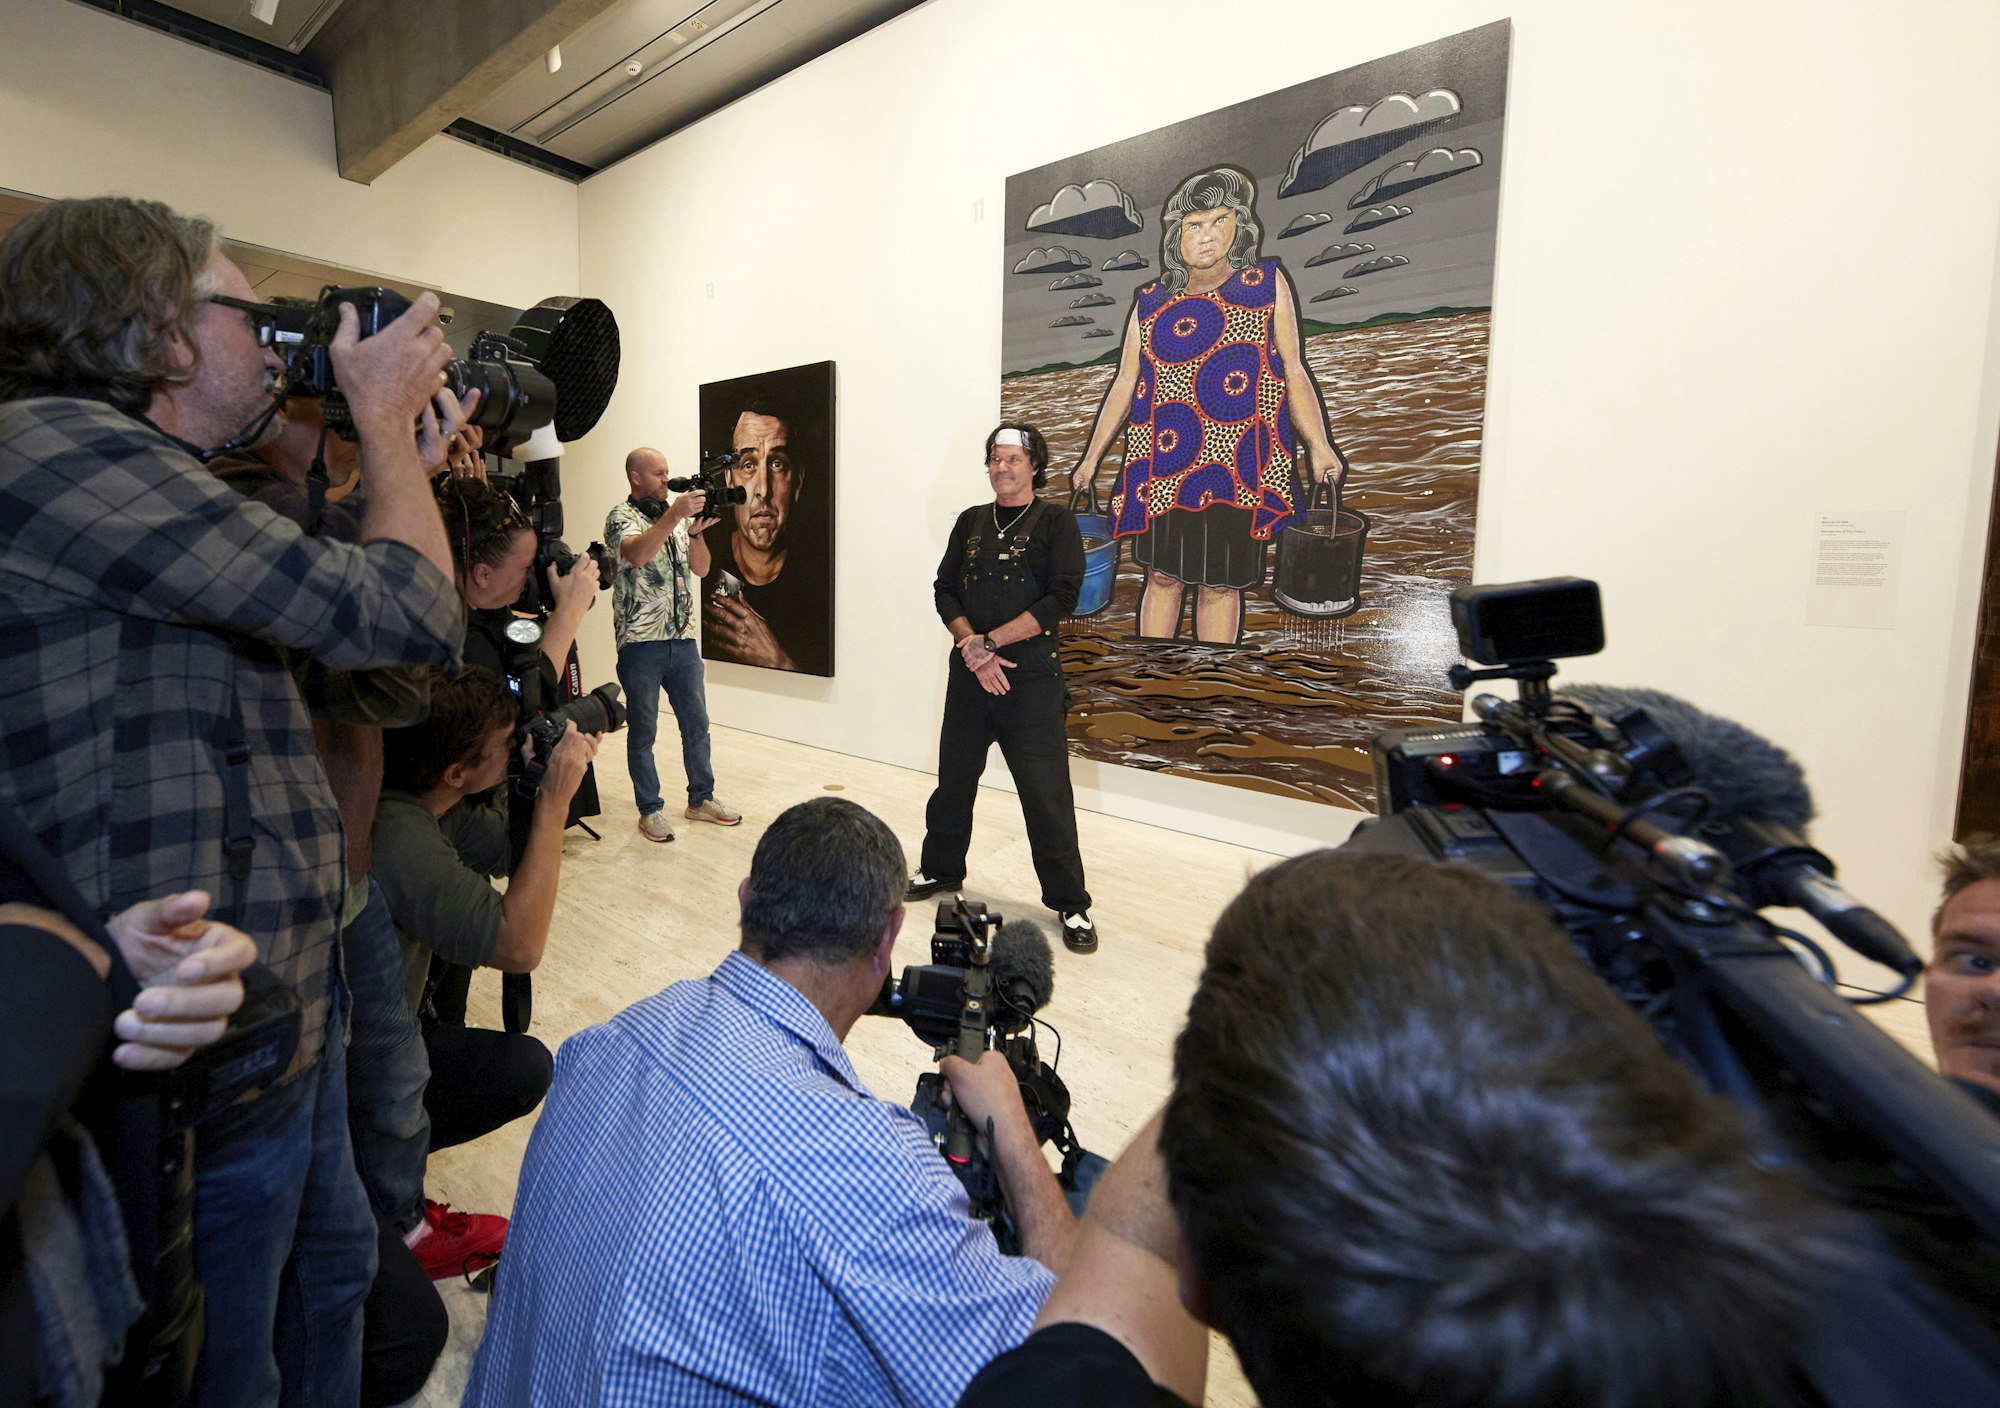 A group of people with cameras pointing at a  person standing in front of a large painting in a gallery space